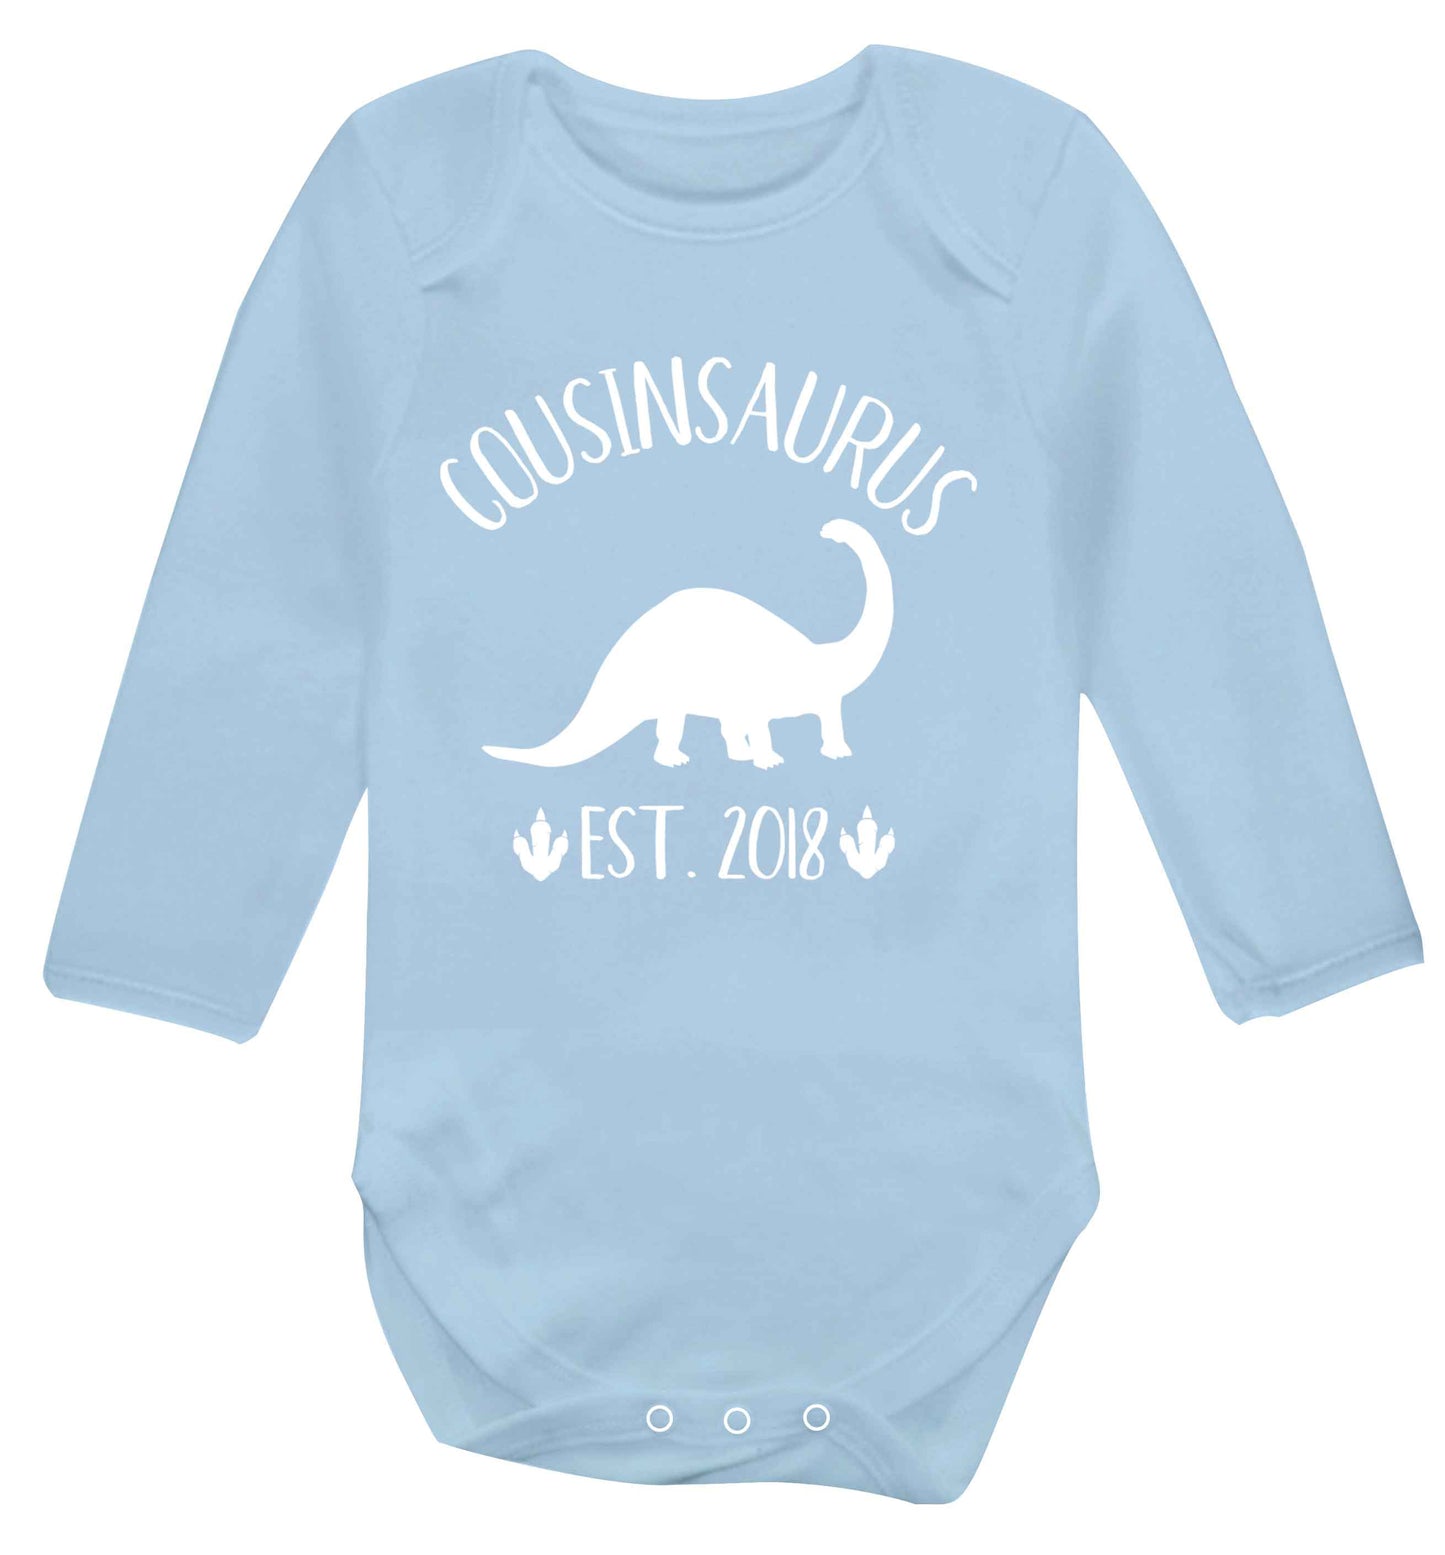 Personalised cousinsaurus since (custom date) Baby Vest long sleeved pale blue 6-12 months